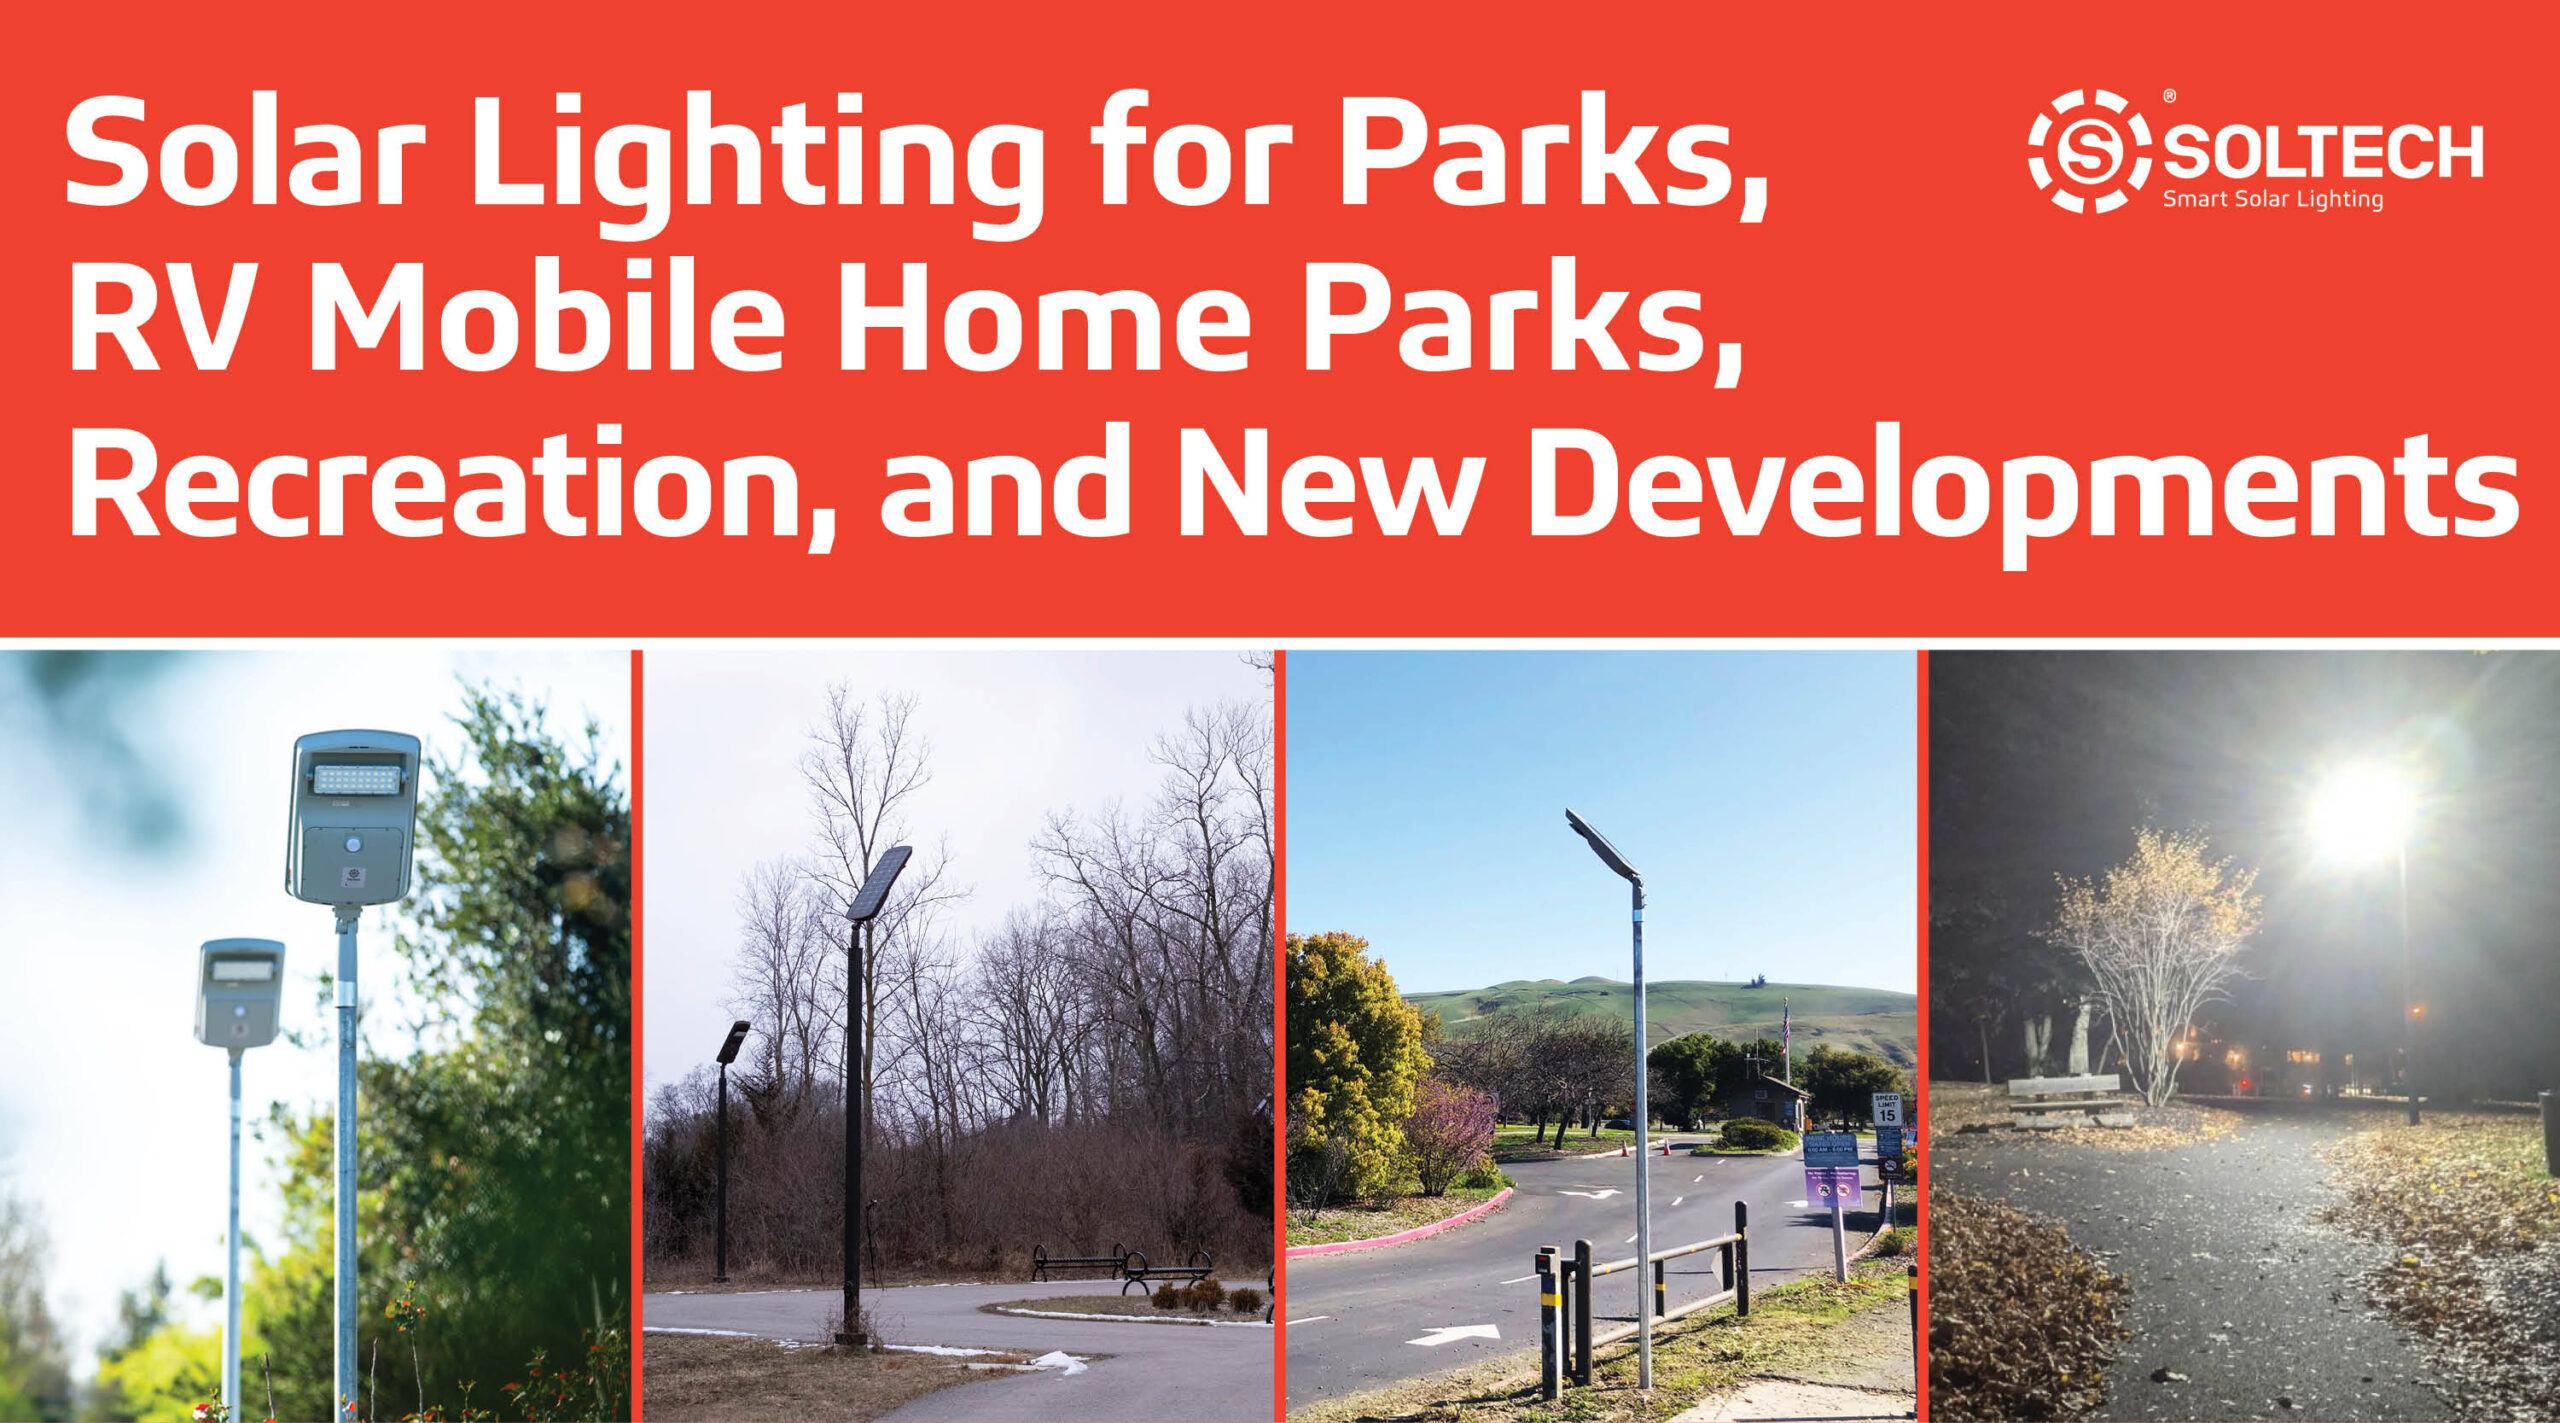 Solar Lighting for Parks, RV Mobile Home Parks, Recreation, and New Developments